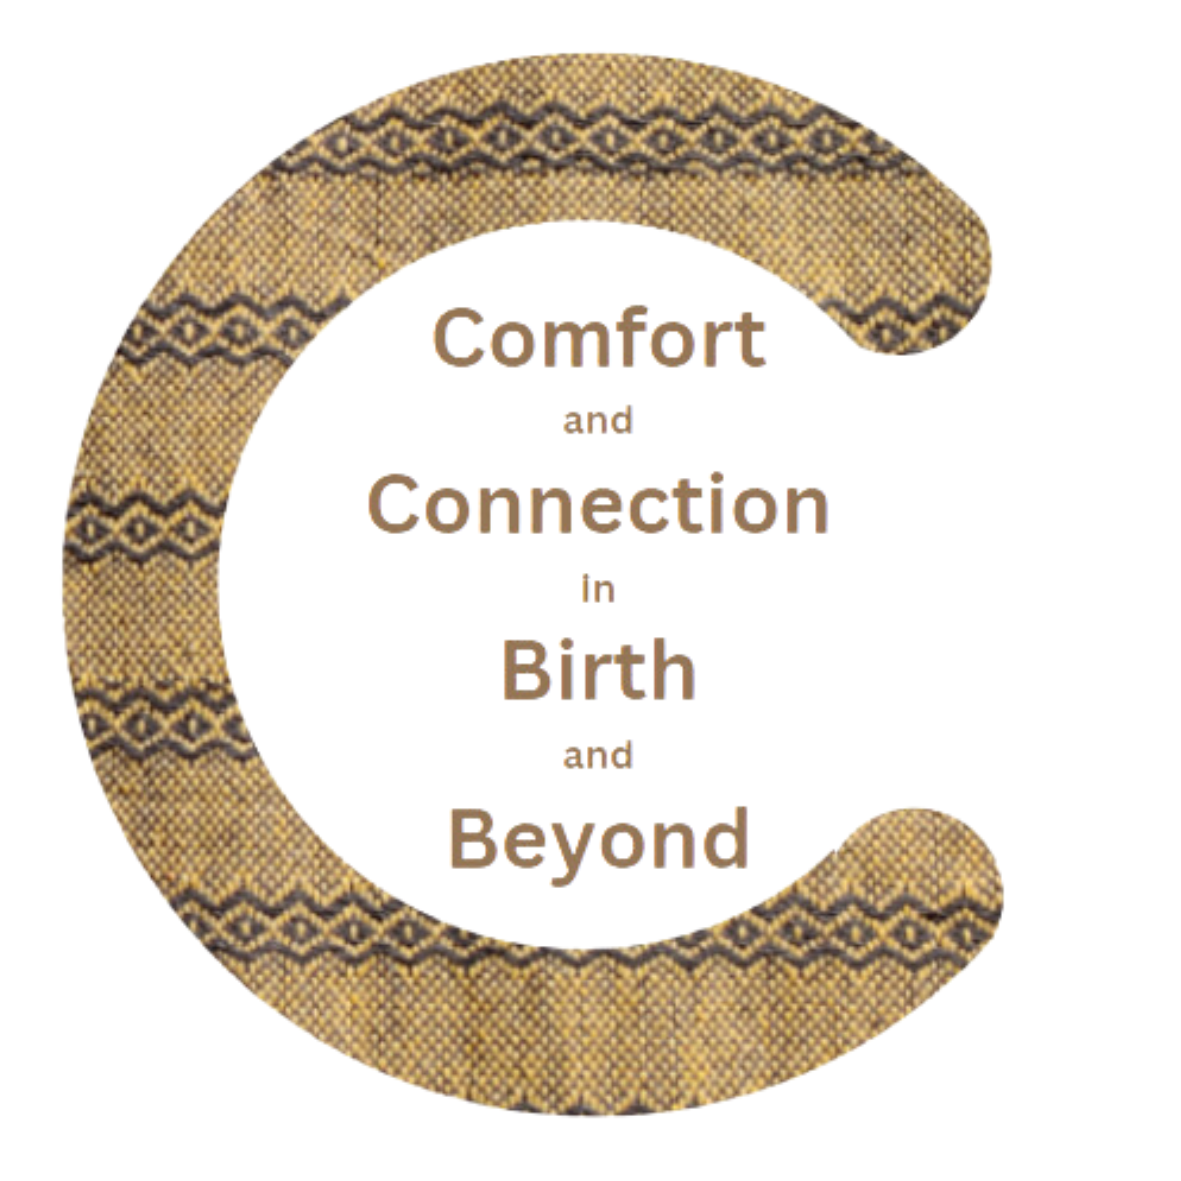 Comfort and Connection for Birth and Beyond